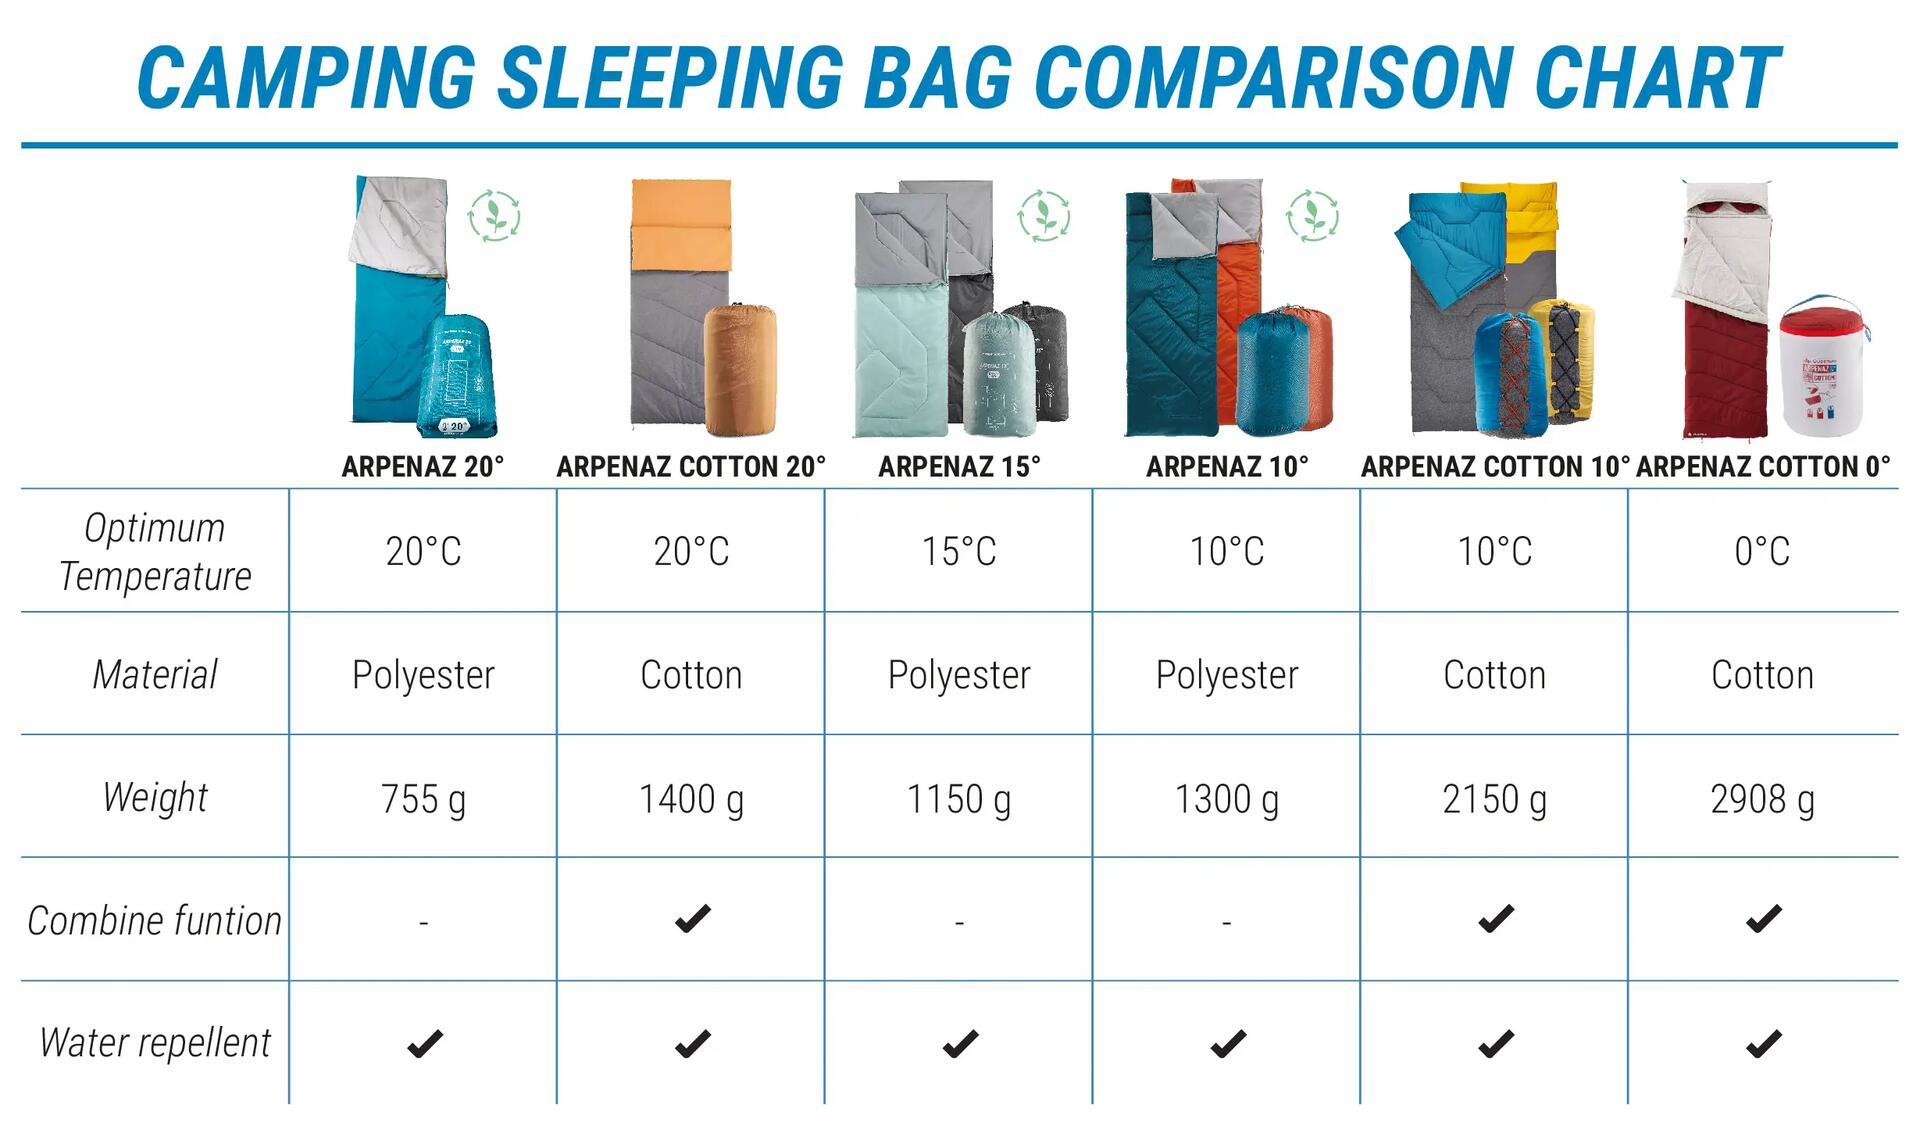 A chart showing camping sleeping bag comparison chart